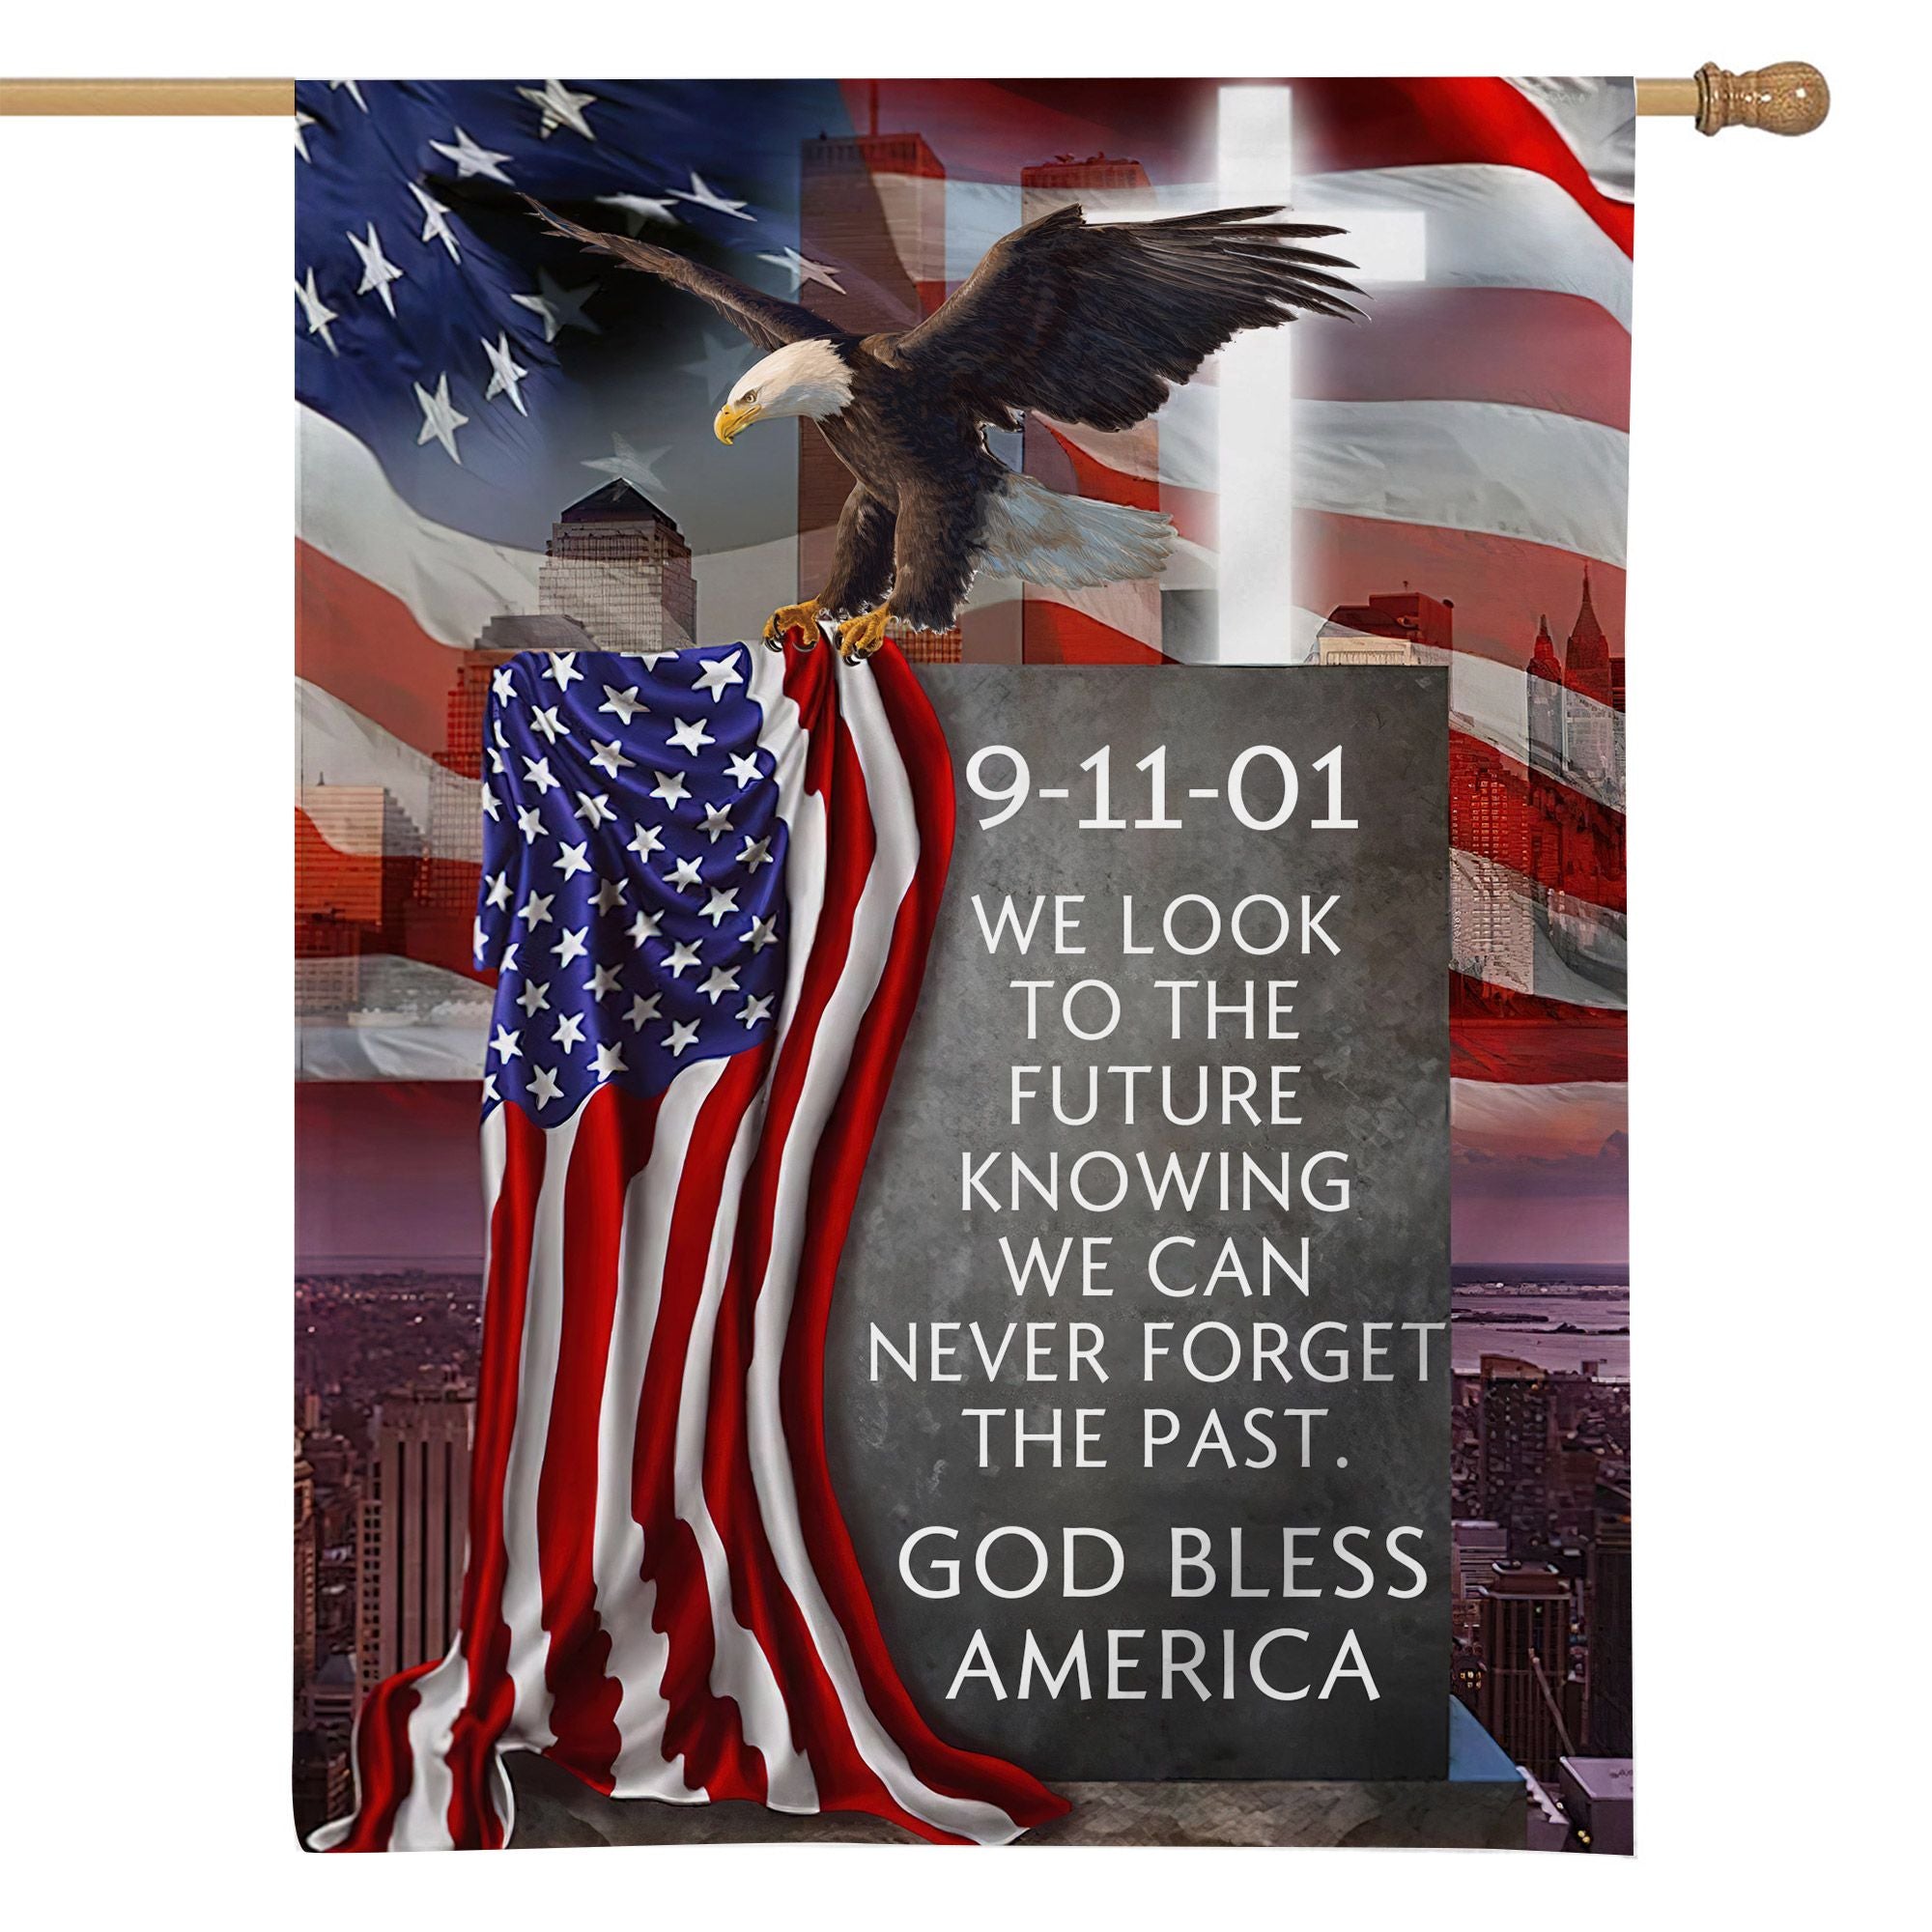 Gearhuman 3D God Bless America Never Forget The Past Patriot Day 9/11 Flag